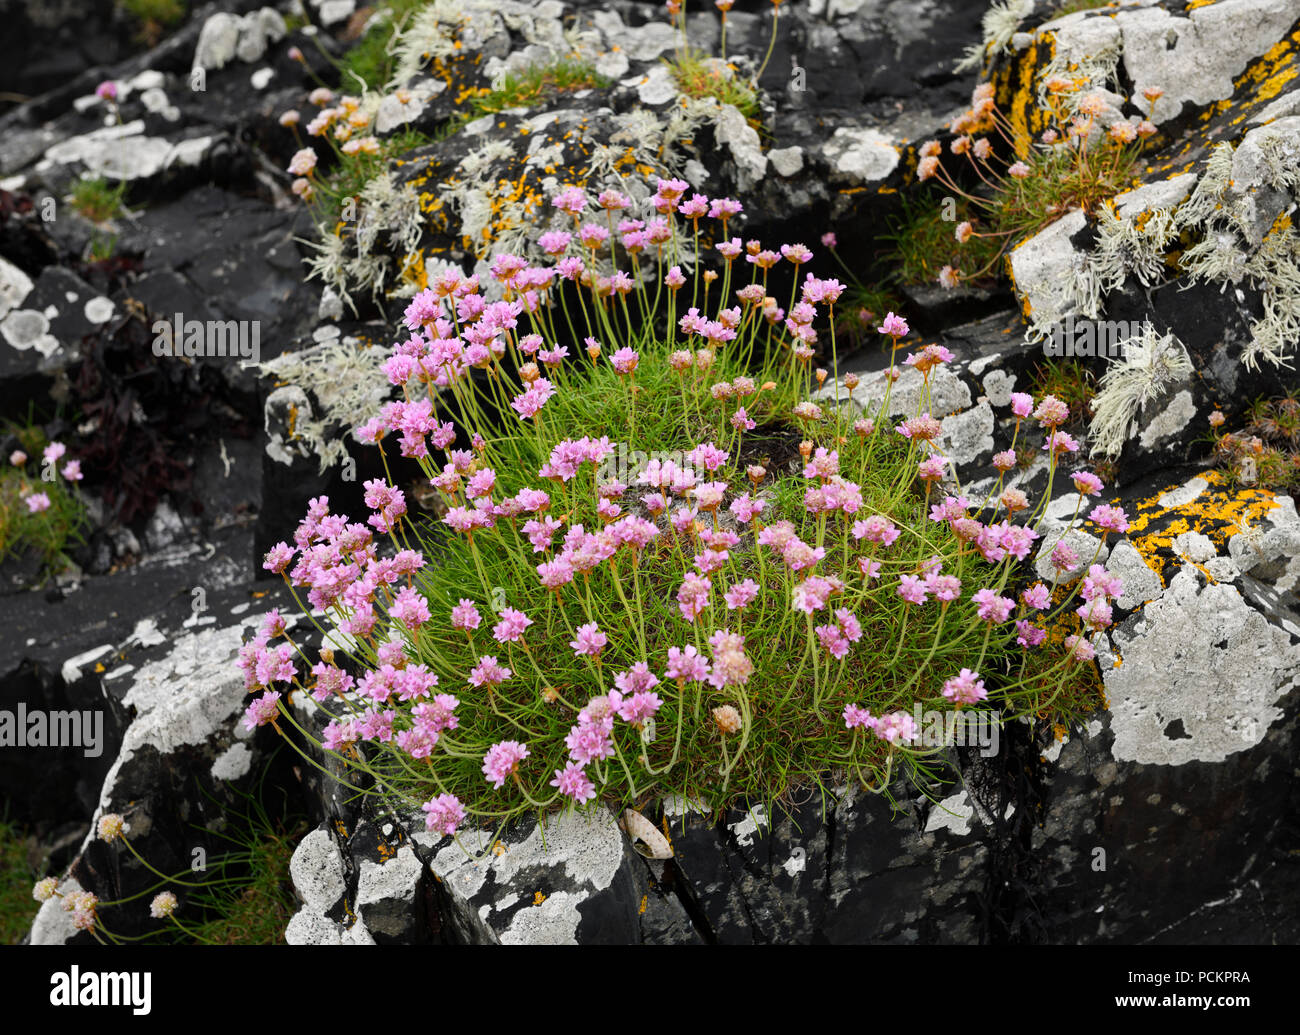 Colorful Sea Thrift flowers and lichen growing on Isle of Iona rocks at shore of Sound of Iona Inner Hebrides Scotland UK Stock Photo